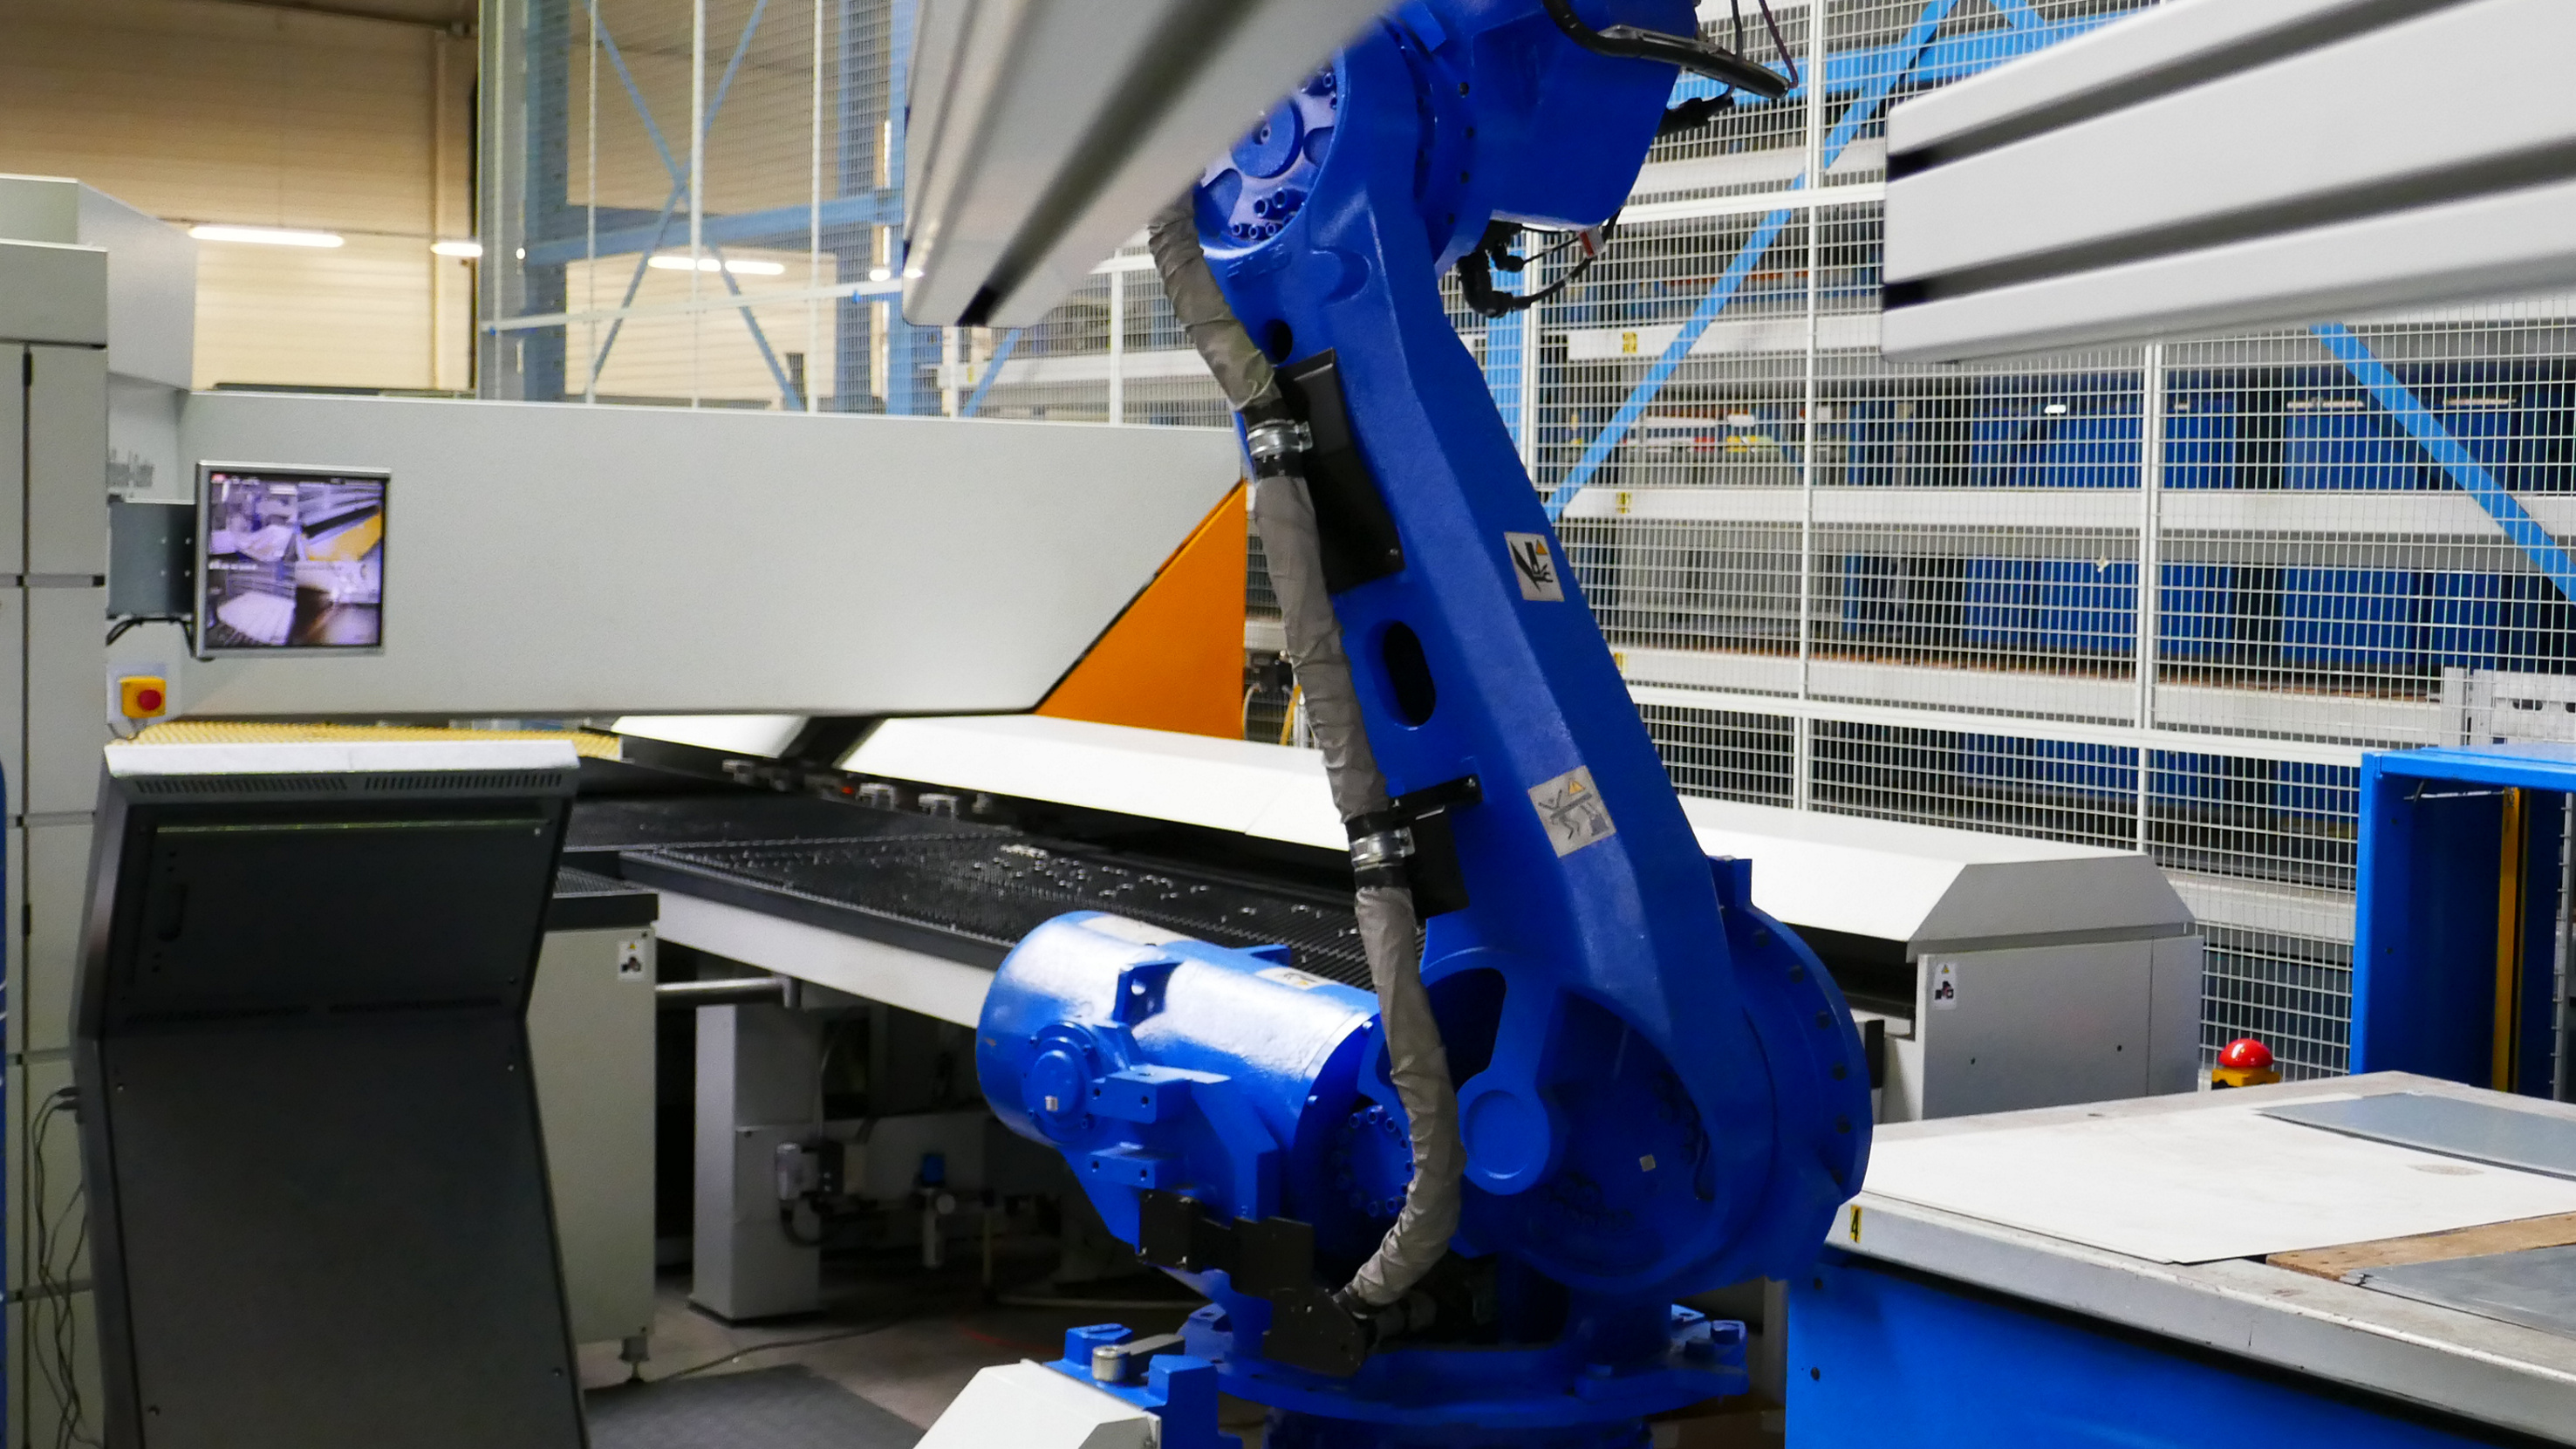 The robot loads the blanks, provided by an automated material handling system.